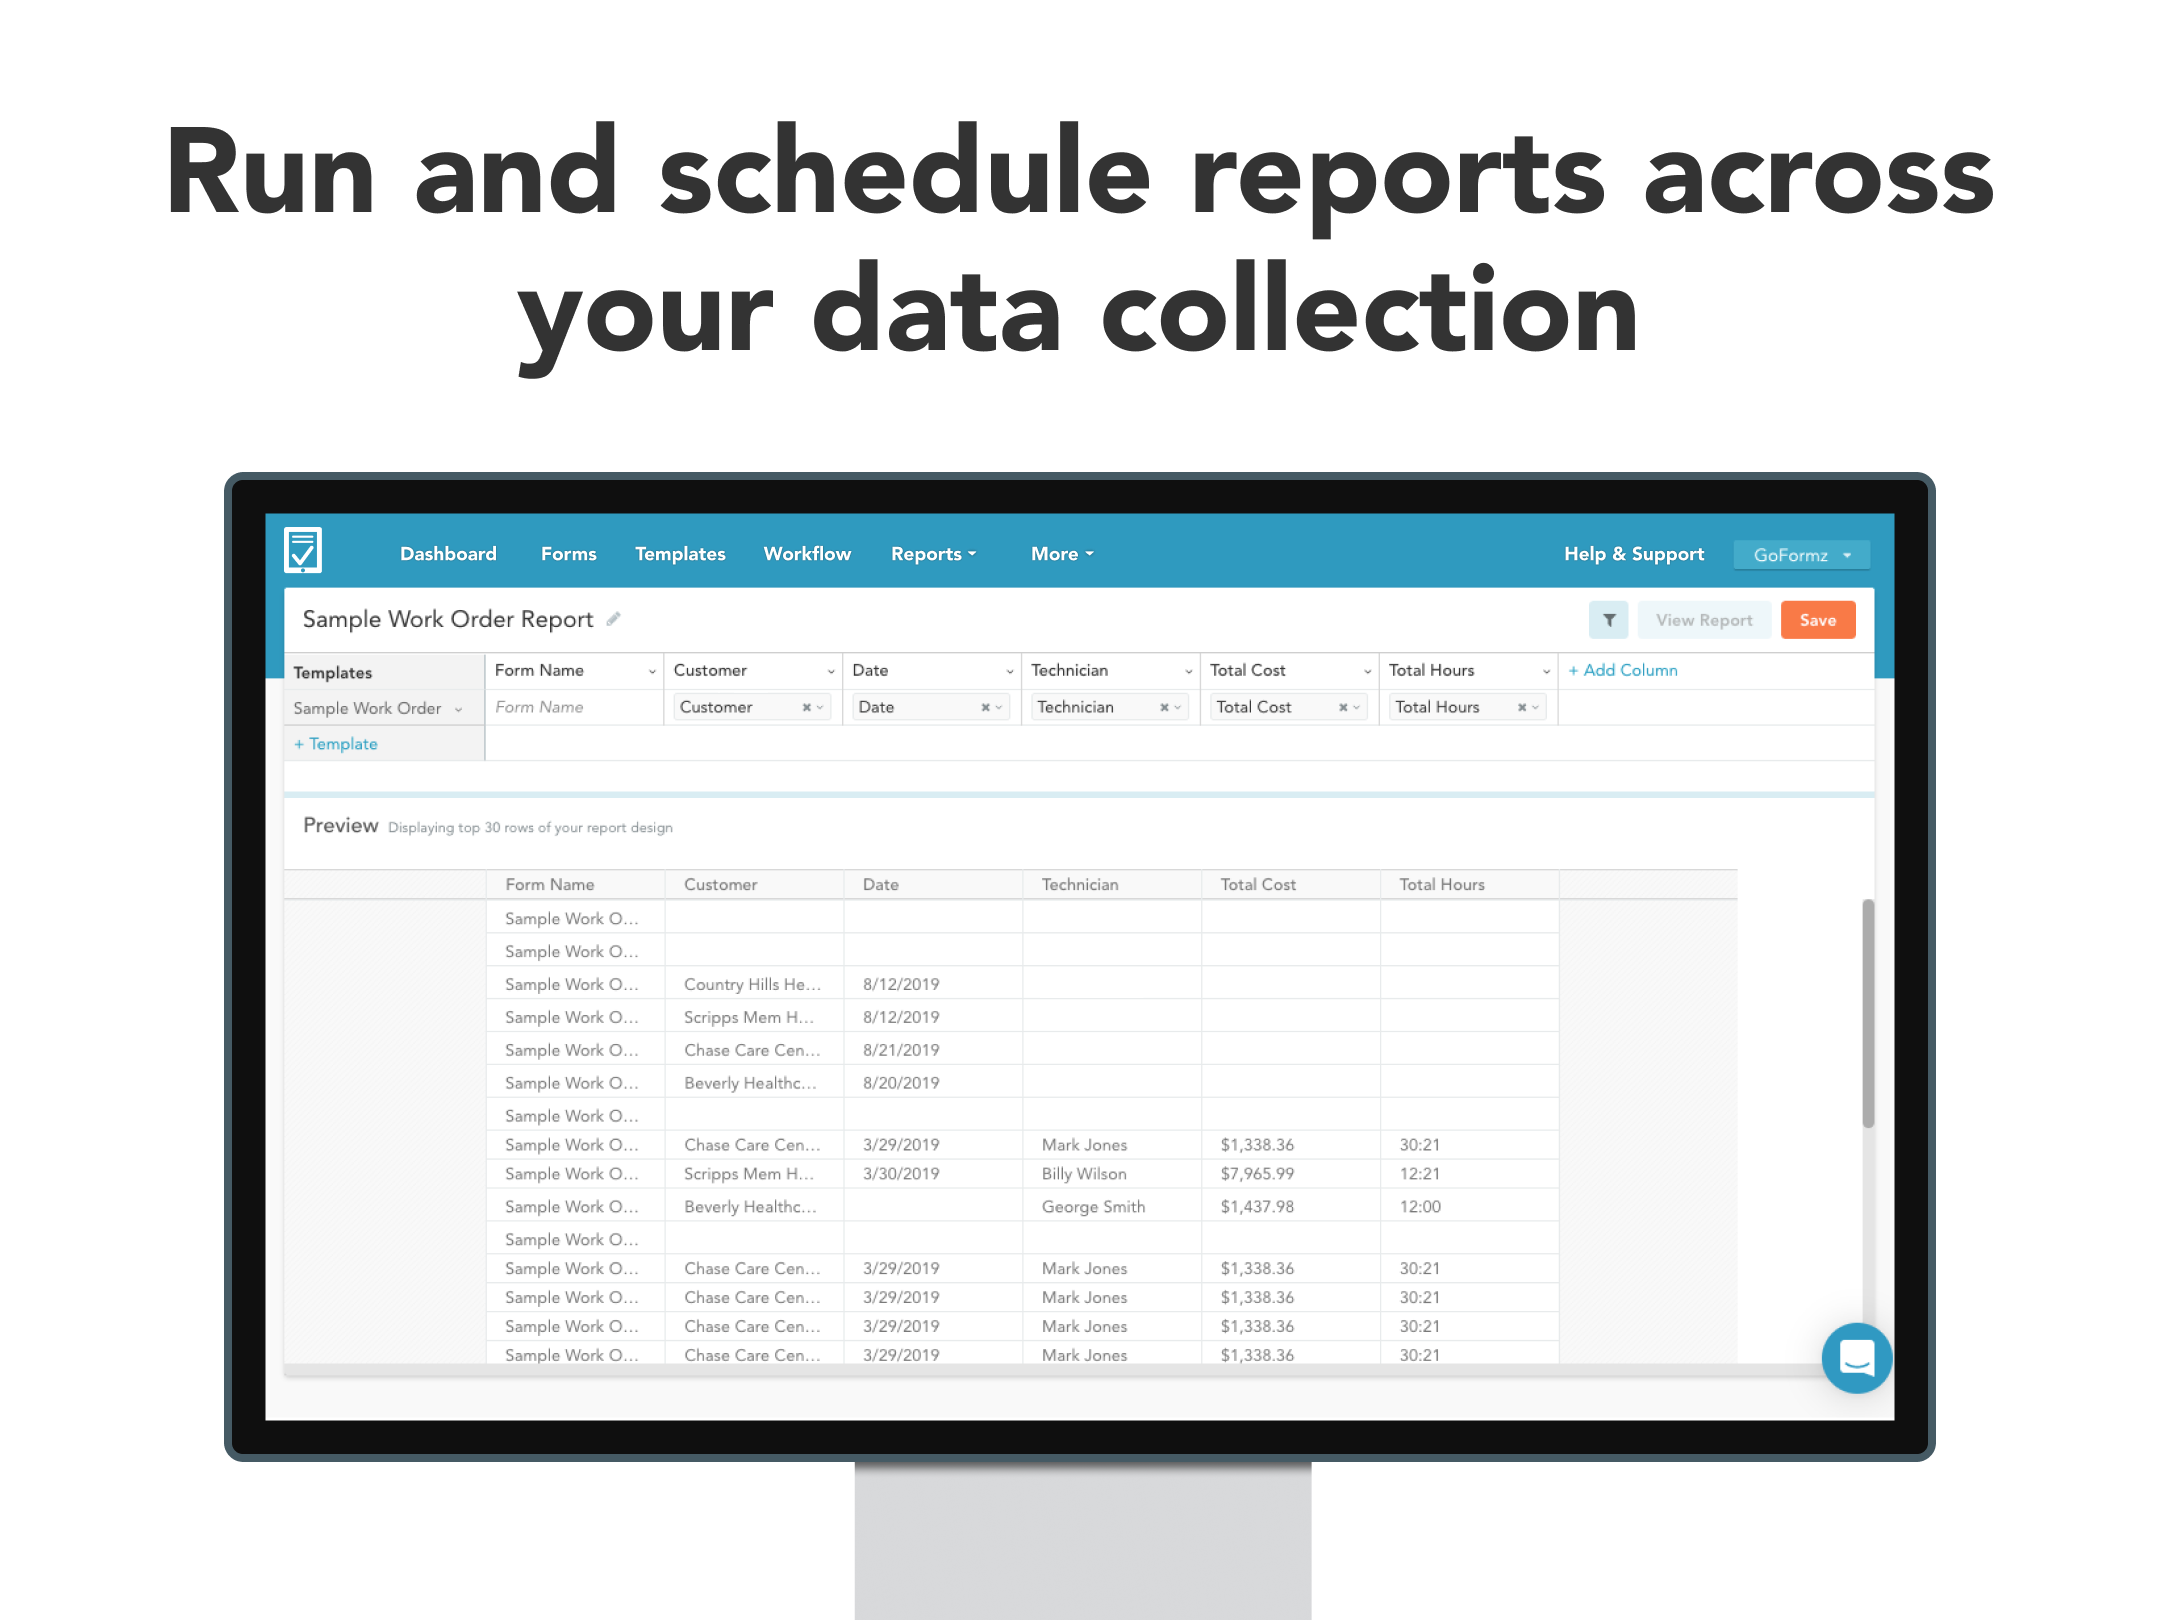 Run and schedule reports across your entire data collection using the GoFormz Reporting Tool